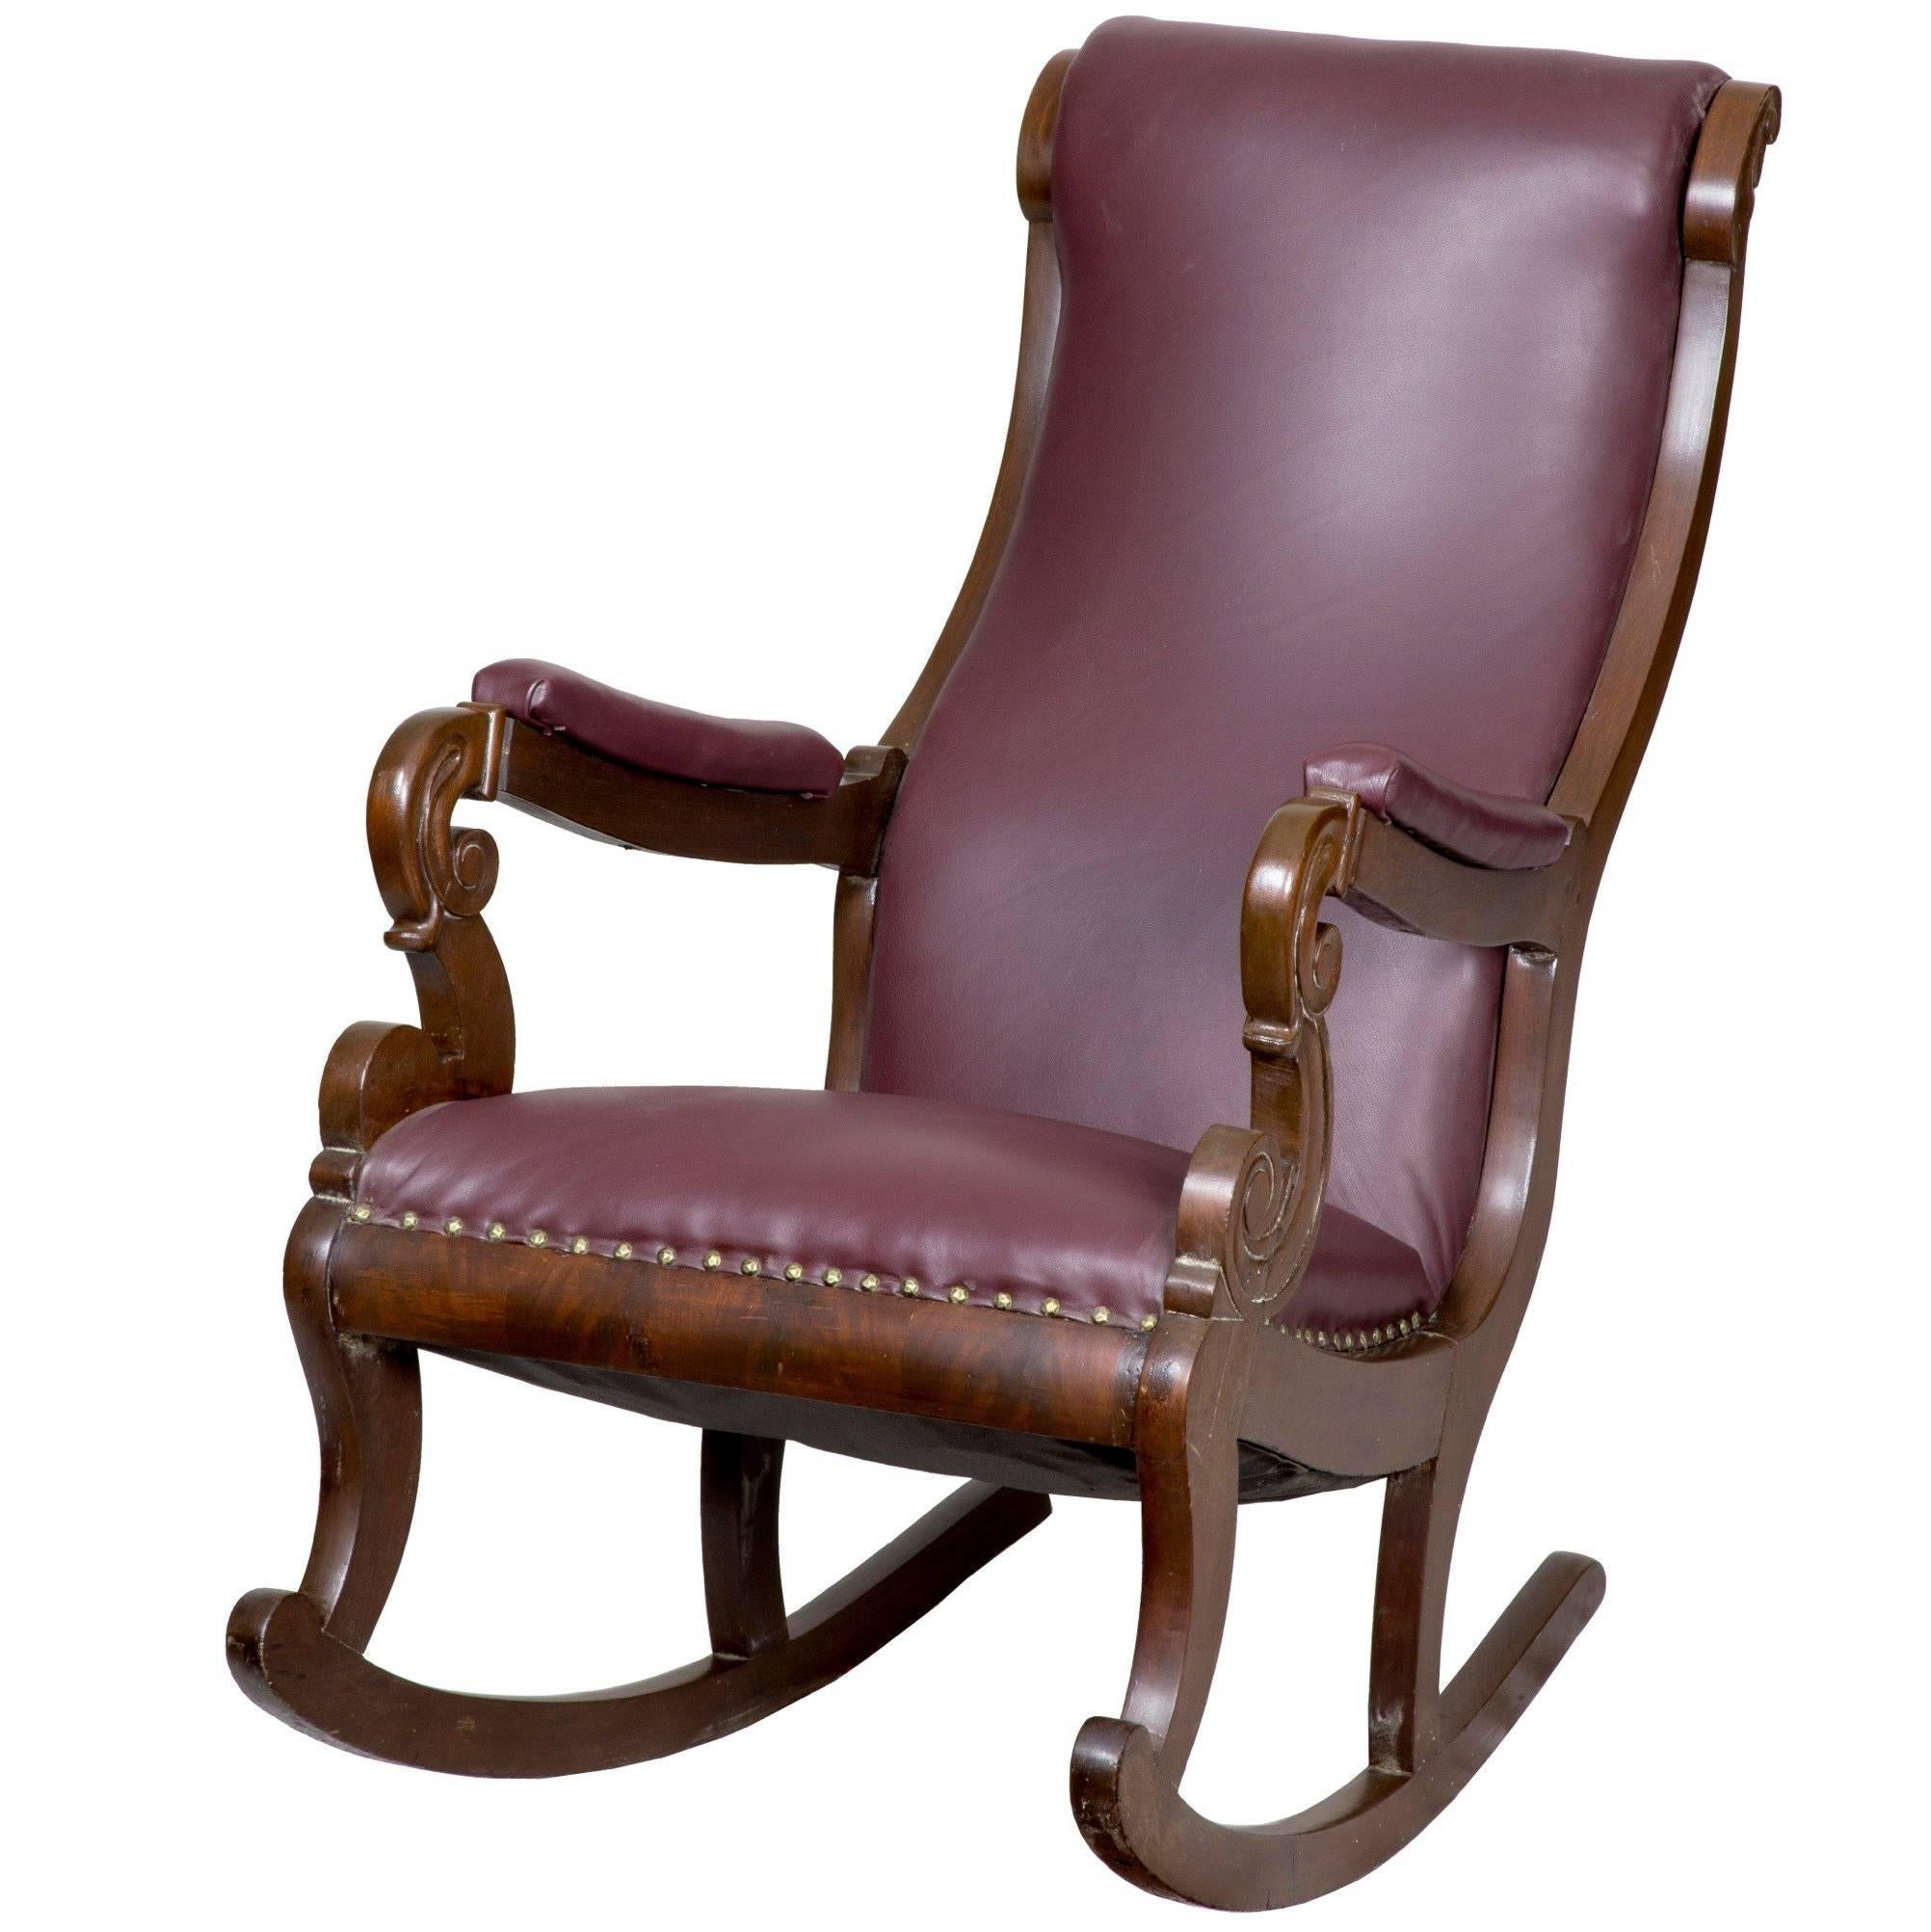 Classical Mahogany Rocker with Carved Scrolled Arm Supports For Sale